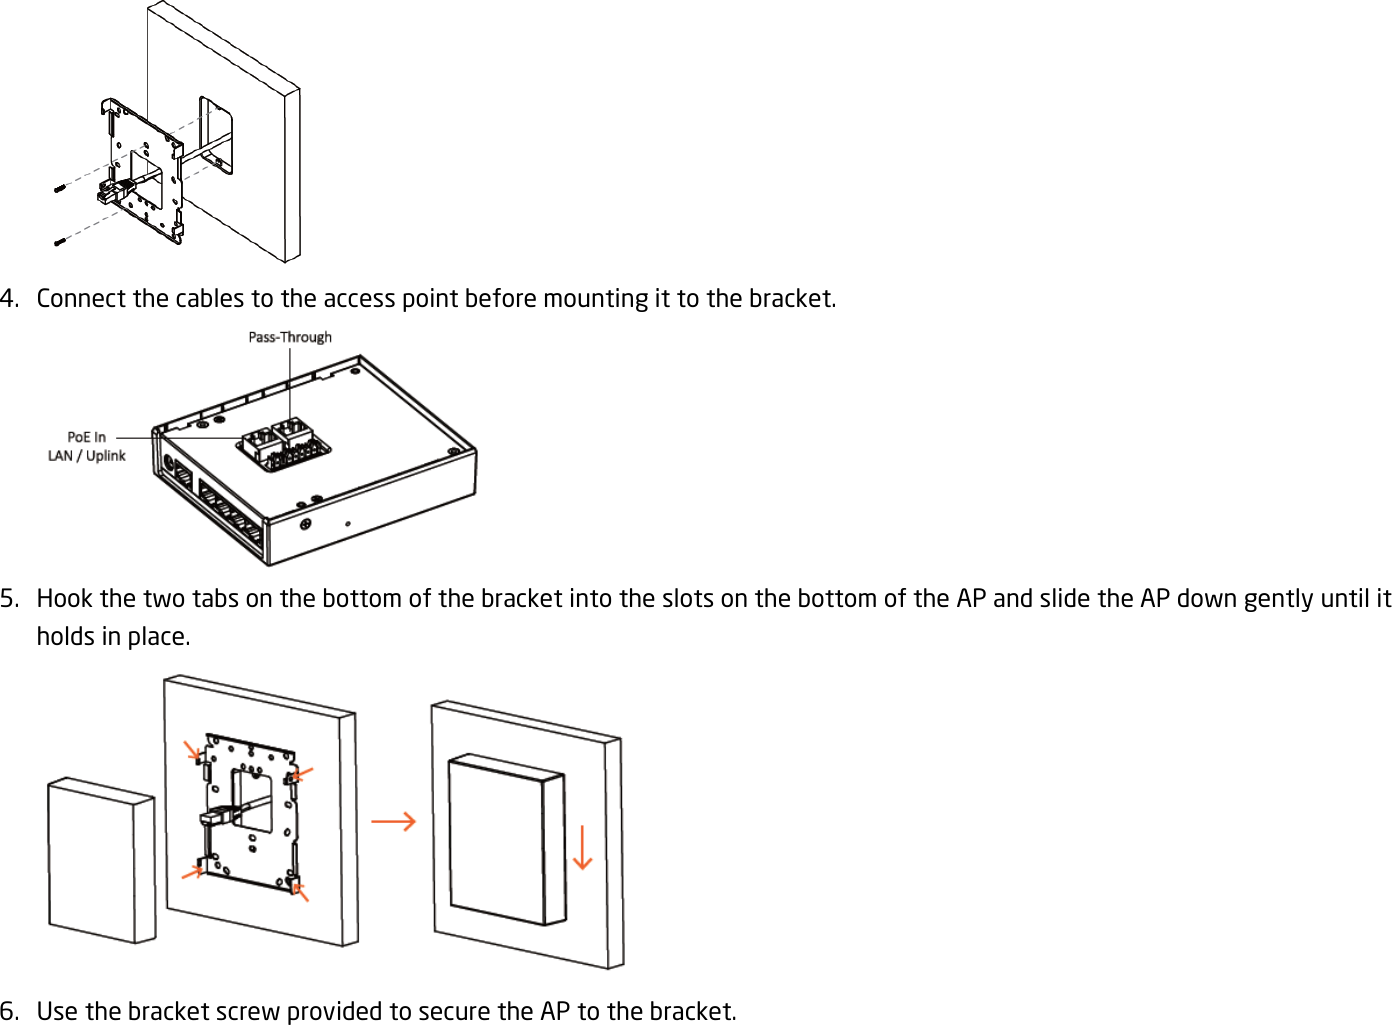  4. Connect the cables to the access point before mounting it to the bracket.  5. Hook the two tabs on the bottom of the bracket into the slots on the bottom of the AP and slide the AP down gently until it holds in place.  6. Use the bracket screw provided to secure the AP to the bracket. 